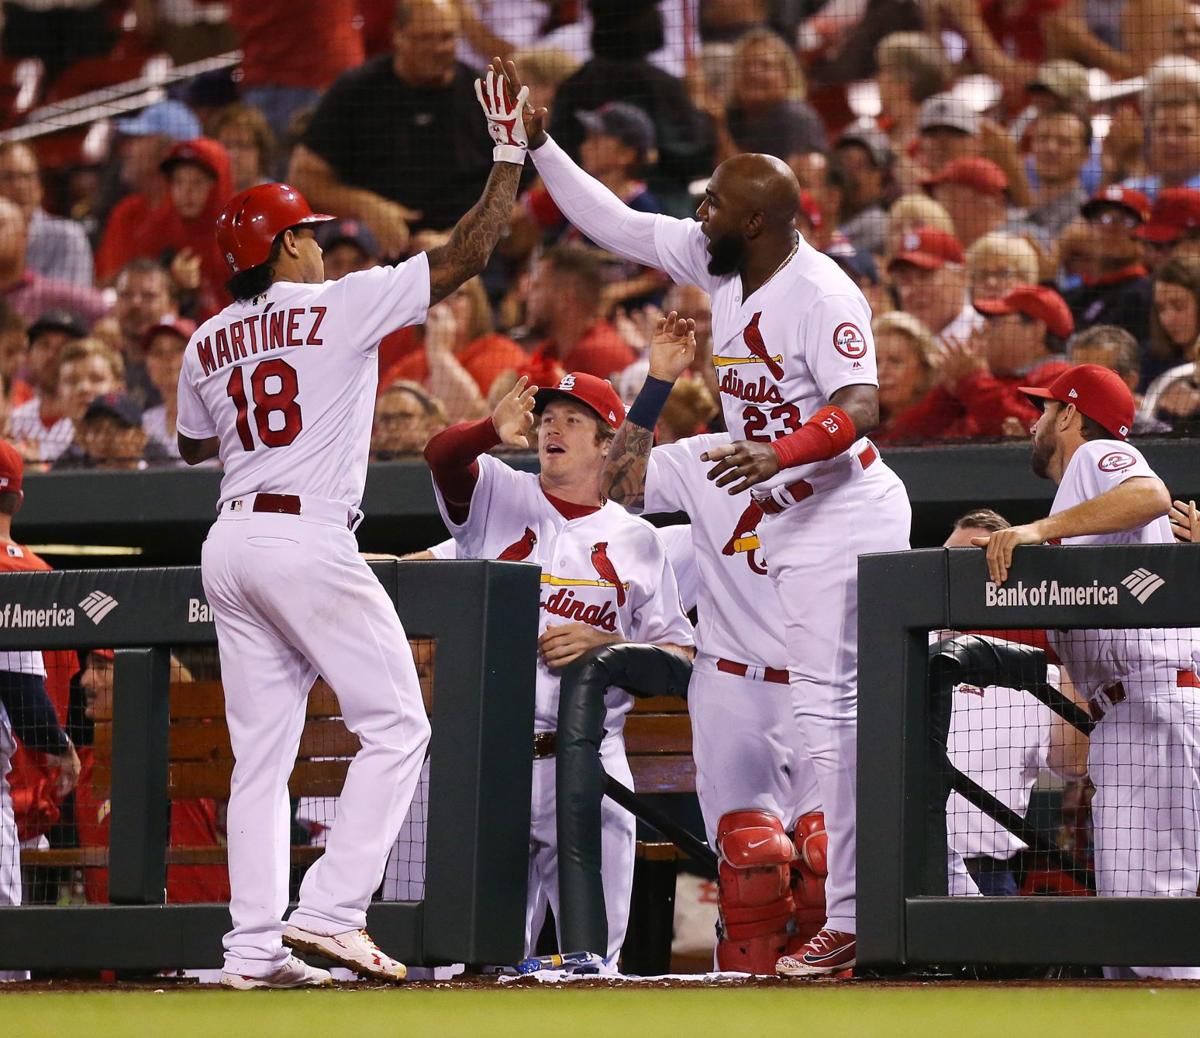 Carpenter's night is one for the books as Cards roll